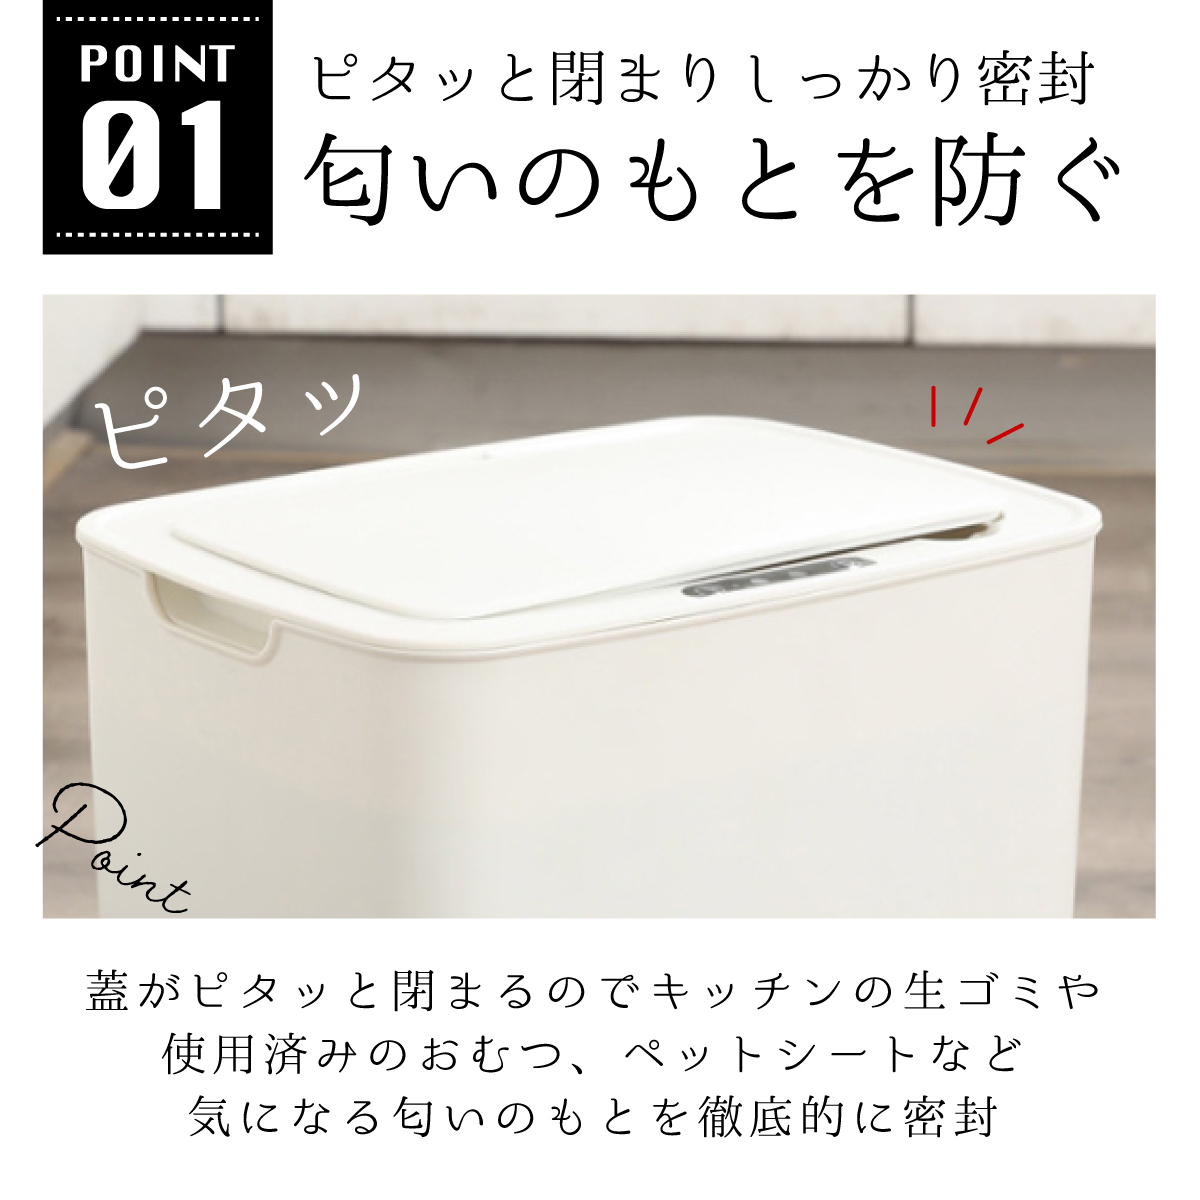  waste basket automatic opening and closing Homme tsu raw .. trash can deodorization automatic waste basket slim stylish sensor automatic opening and closing waste basket kitchen dumpster sanitary box automatic air-tigh ..